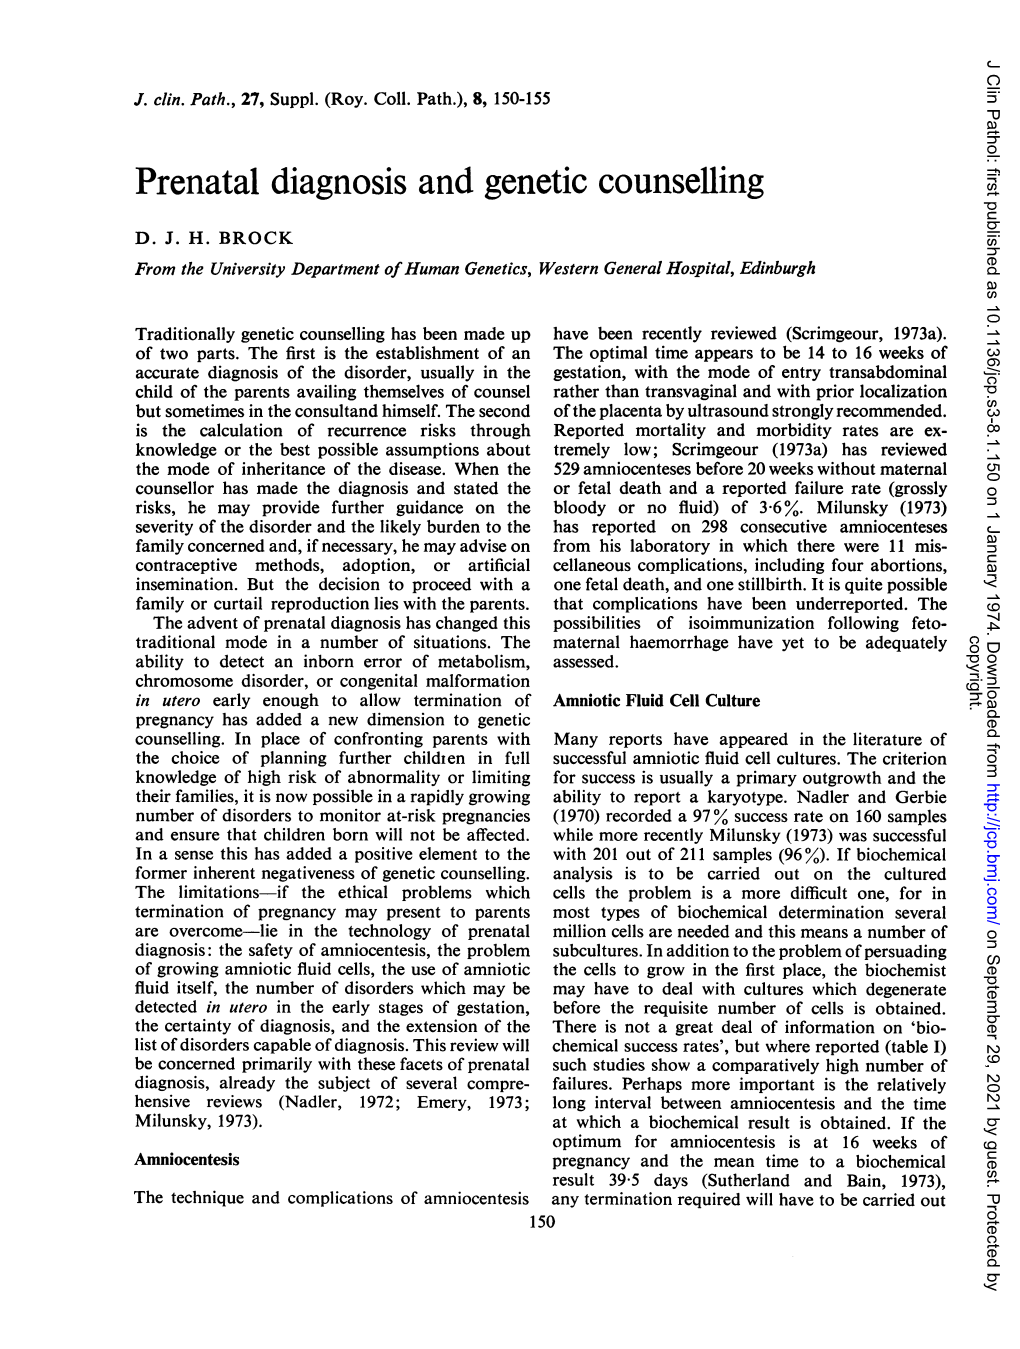 Prenatal Diagnosis and Genetic Counselling